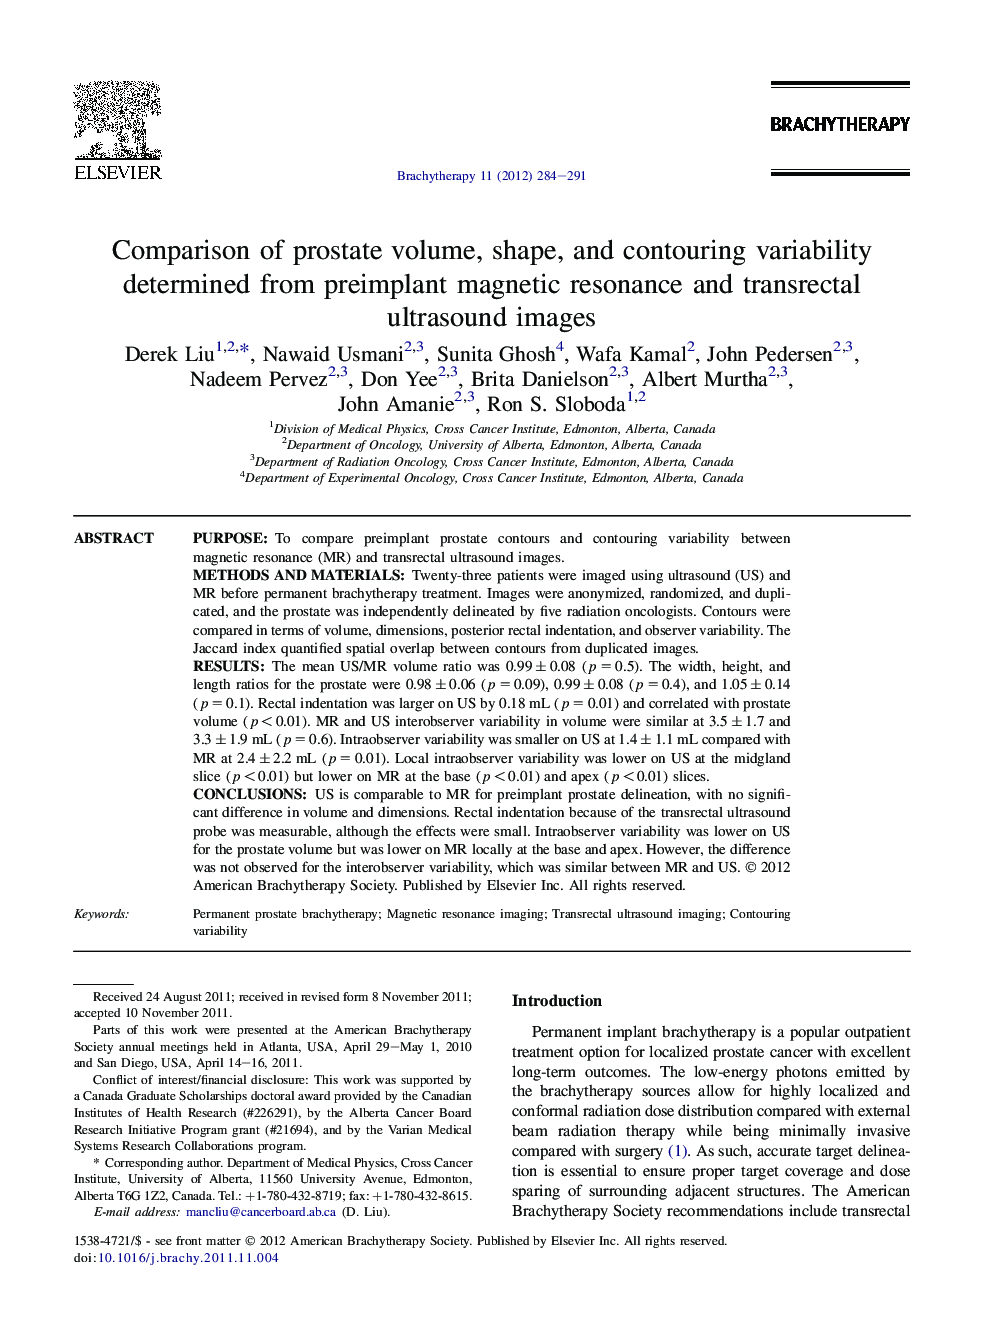 Comparison of prostate volume, shape, and contouring variability determined from preimplant magnetic resonance and transrectal ultrasound images